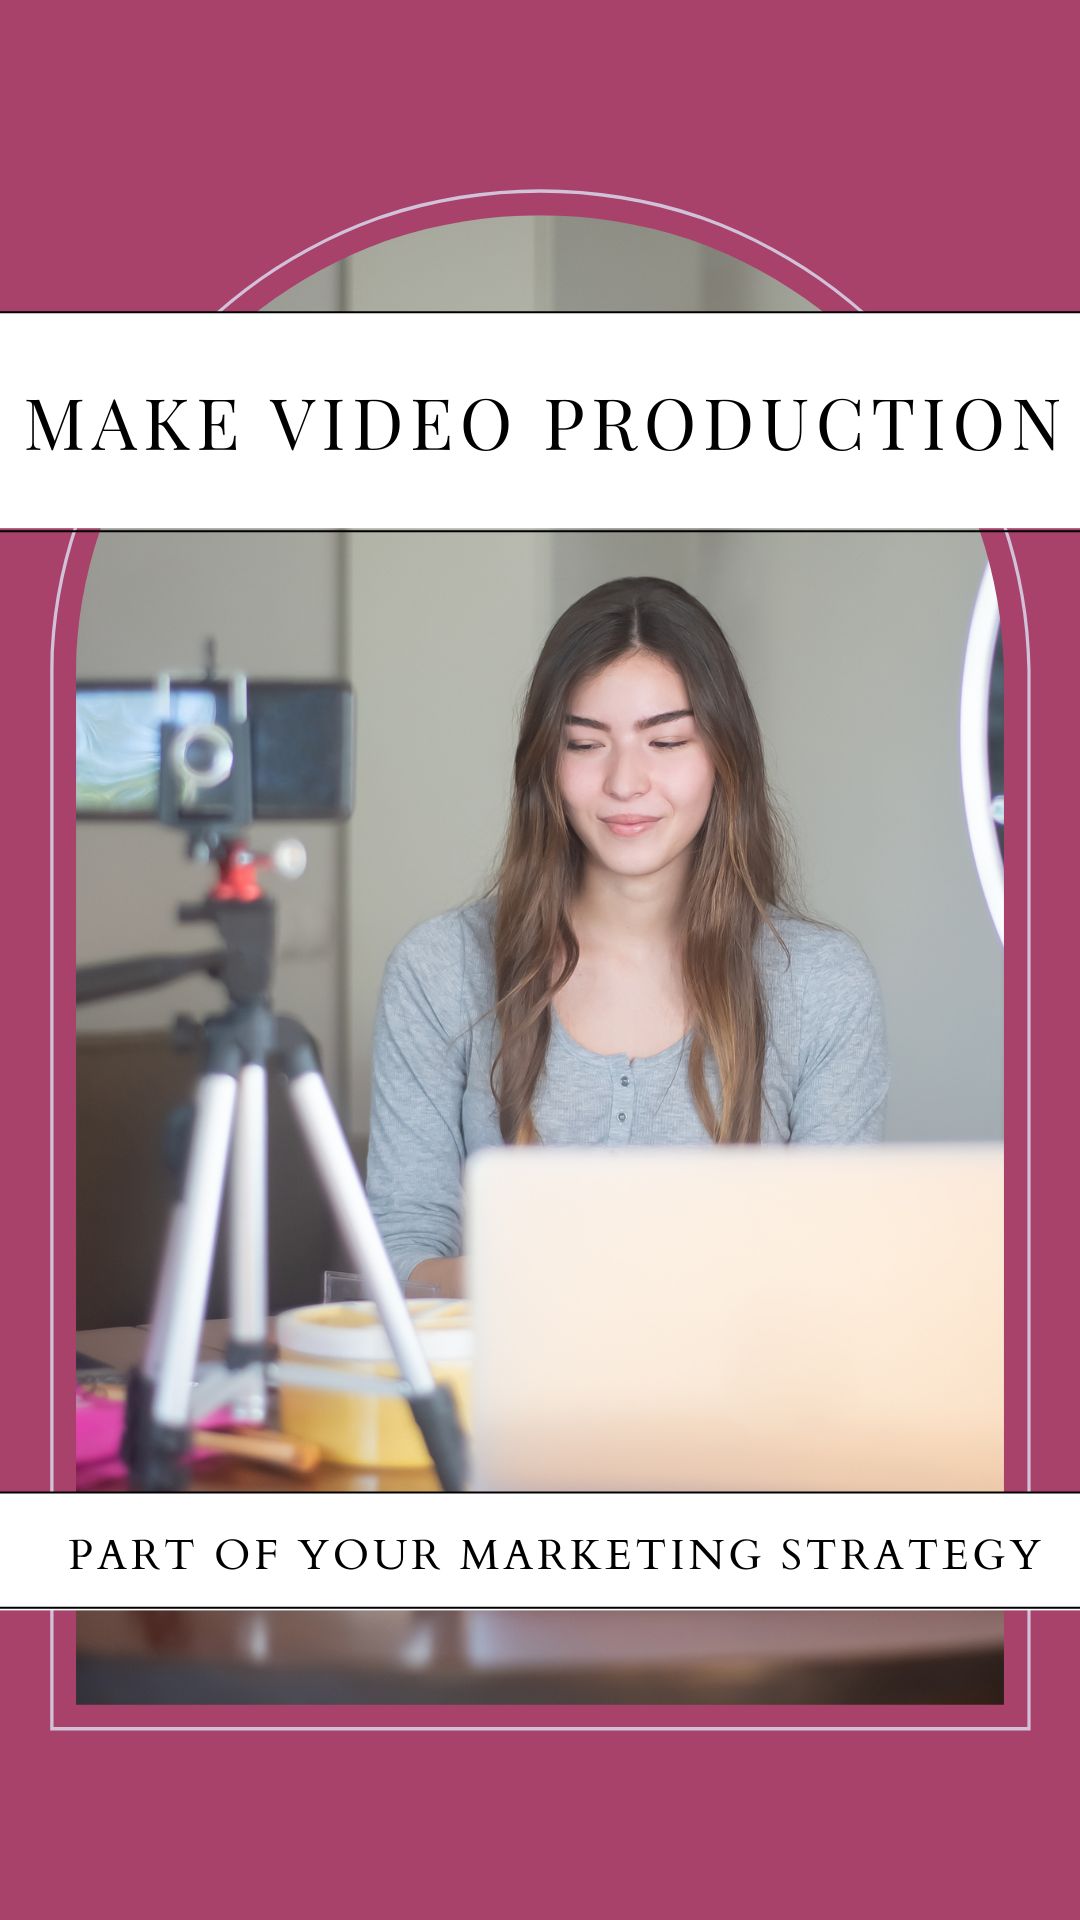 In recent years, video production has gotten notably more inexpensive, making it possible for small and medium-sized enterprises that do not have large budgets to profit from it. 